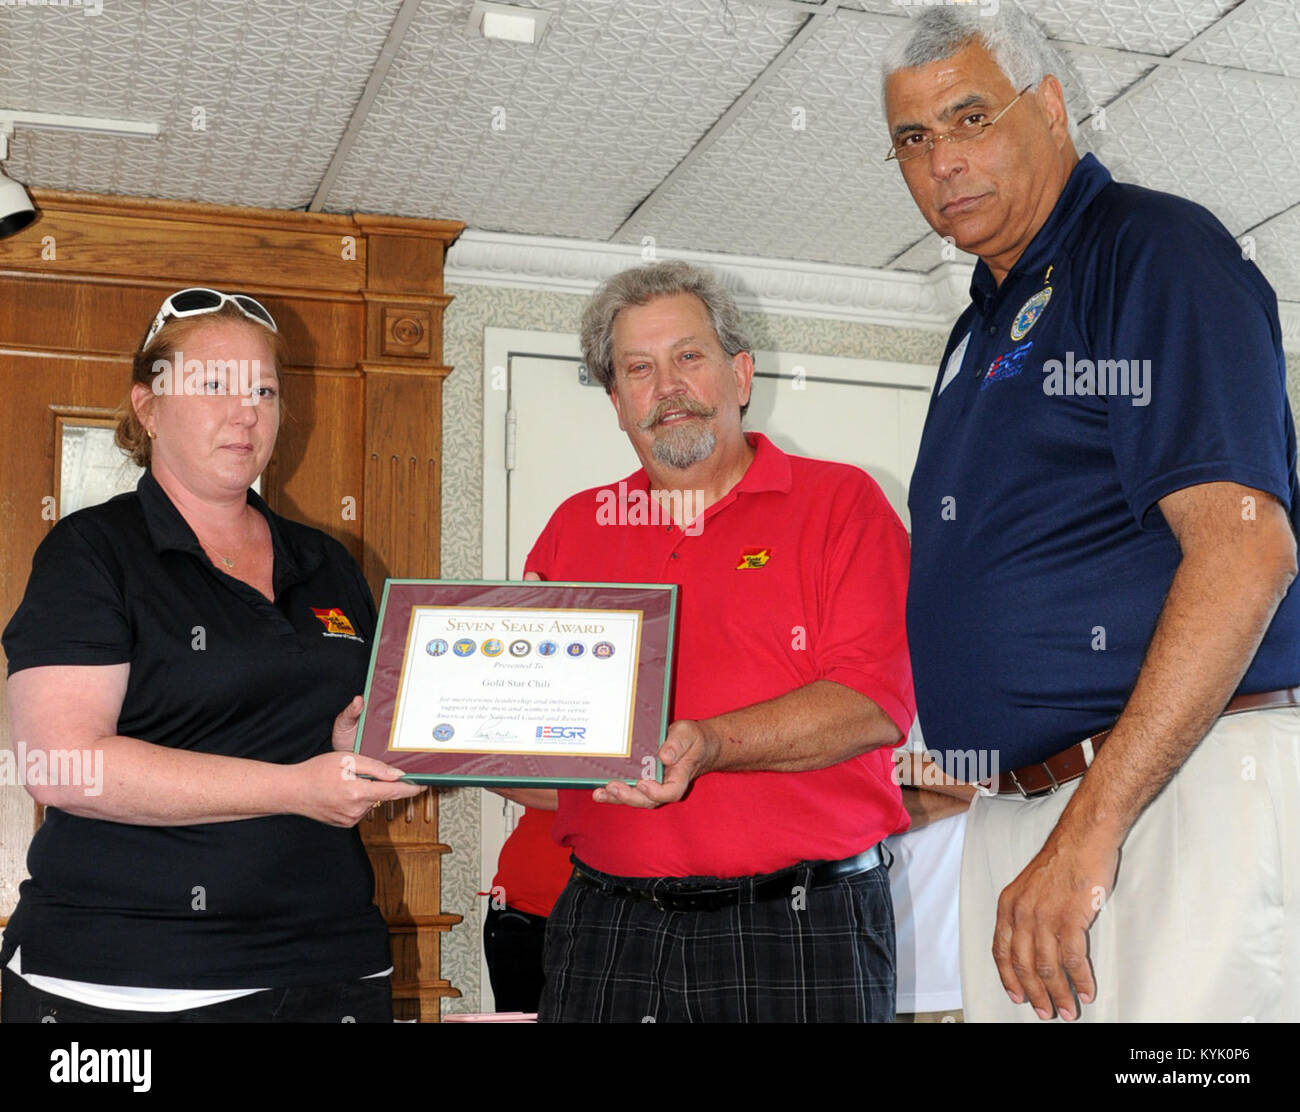 Rodney D. Bell, Area Chief for Kentucky's Employer Support of the Guard and Reserve (ESGR), presents the Seven Seals Award to Gold Star Chili Representatives during a riverboat ride honoring the surviving men and women of the U.S Military, Sunday, June 12, 2016 in Newport. Ohio-based, Gold Star Chili provides all of the food for the families during the event. (U.S. Army National Guard photo by Sgt. Brandy Mort) Stock Photo